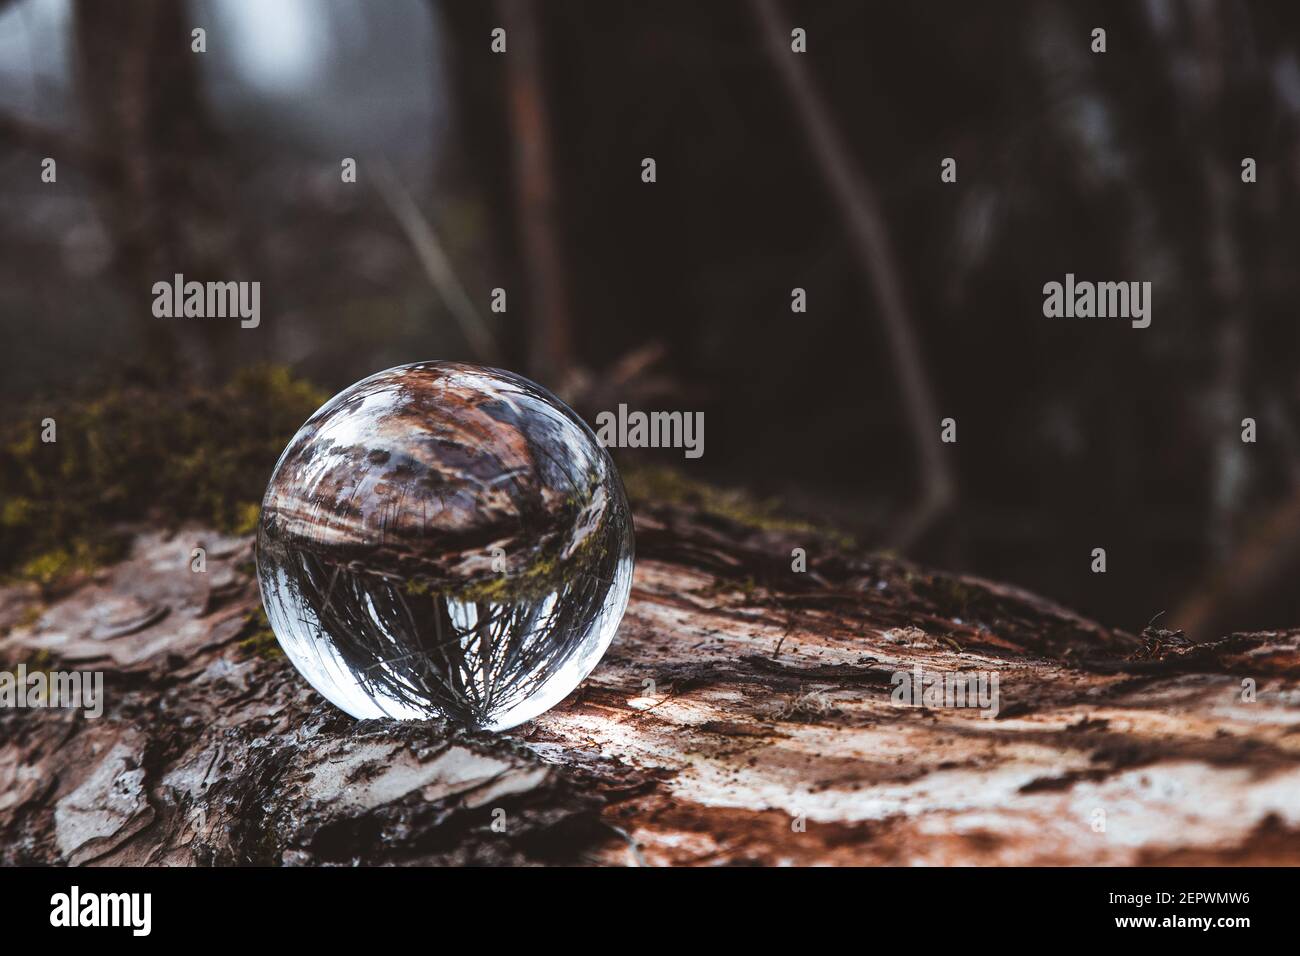 Lensball photography in a misty forest woodland scene Stock Photo